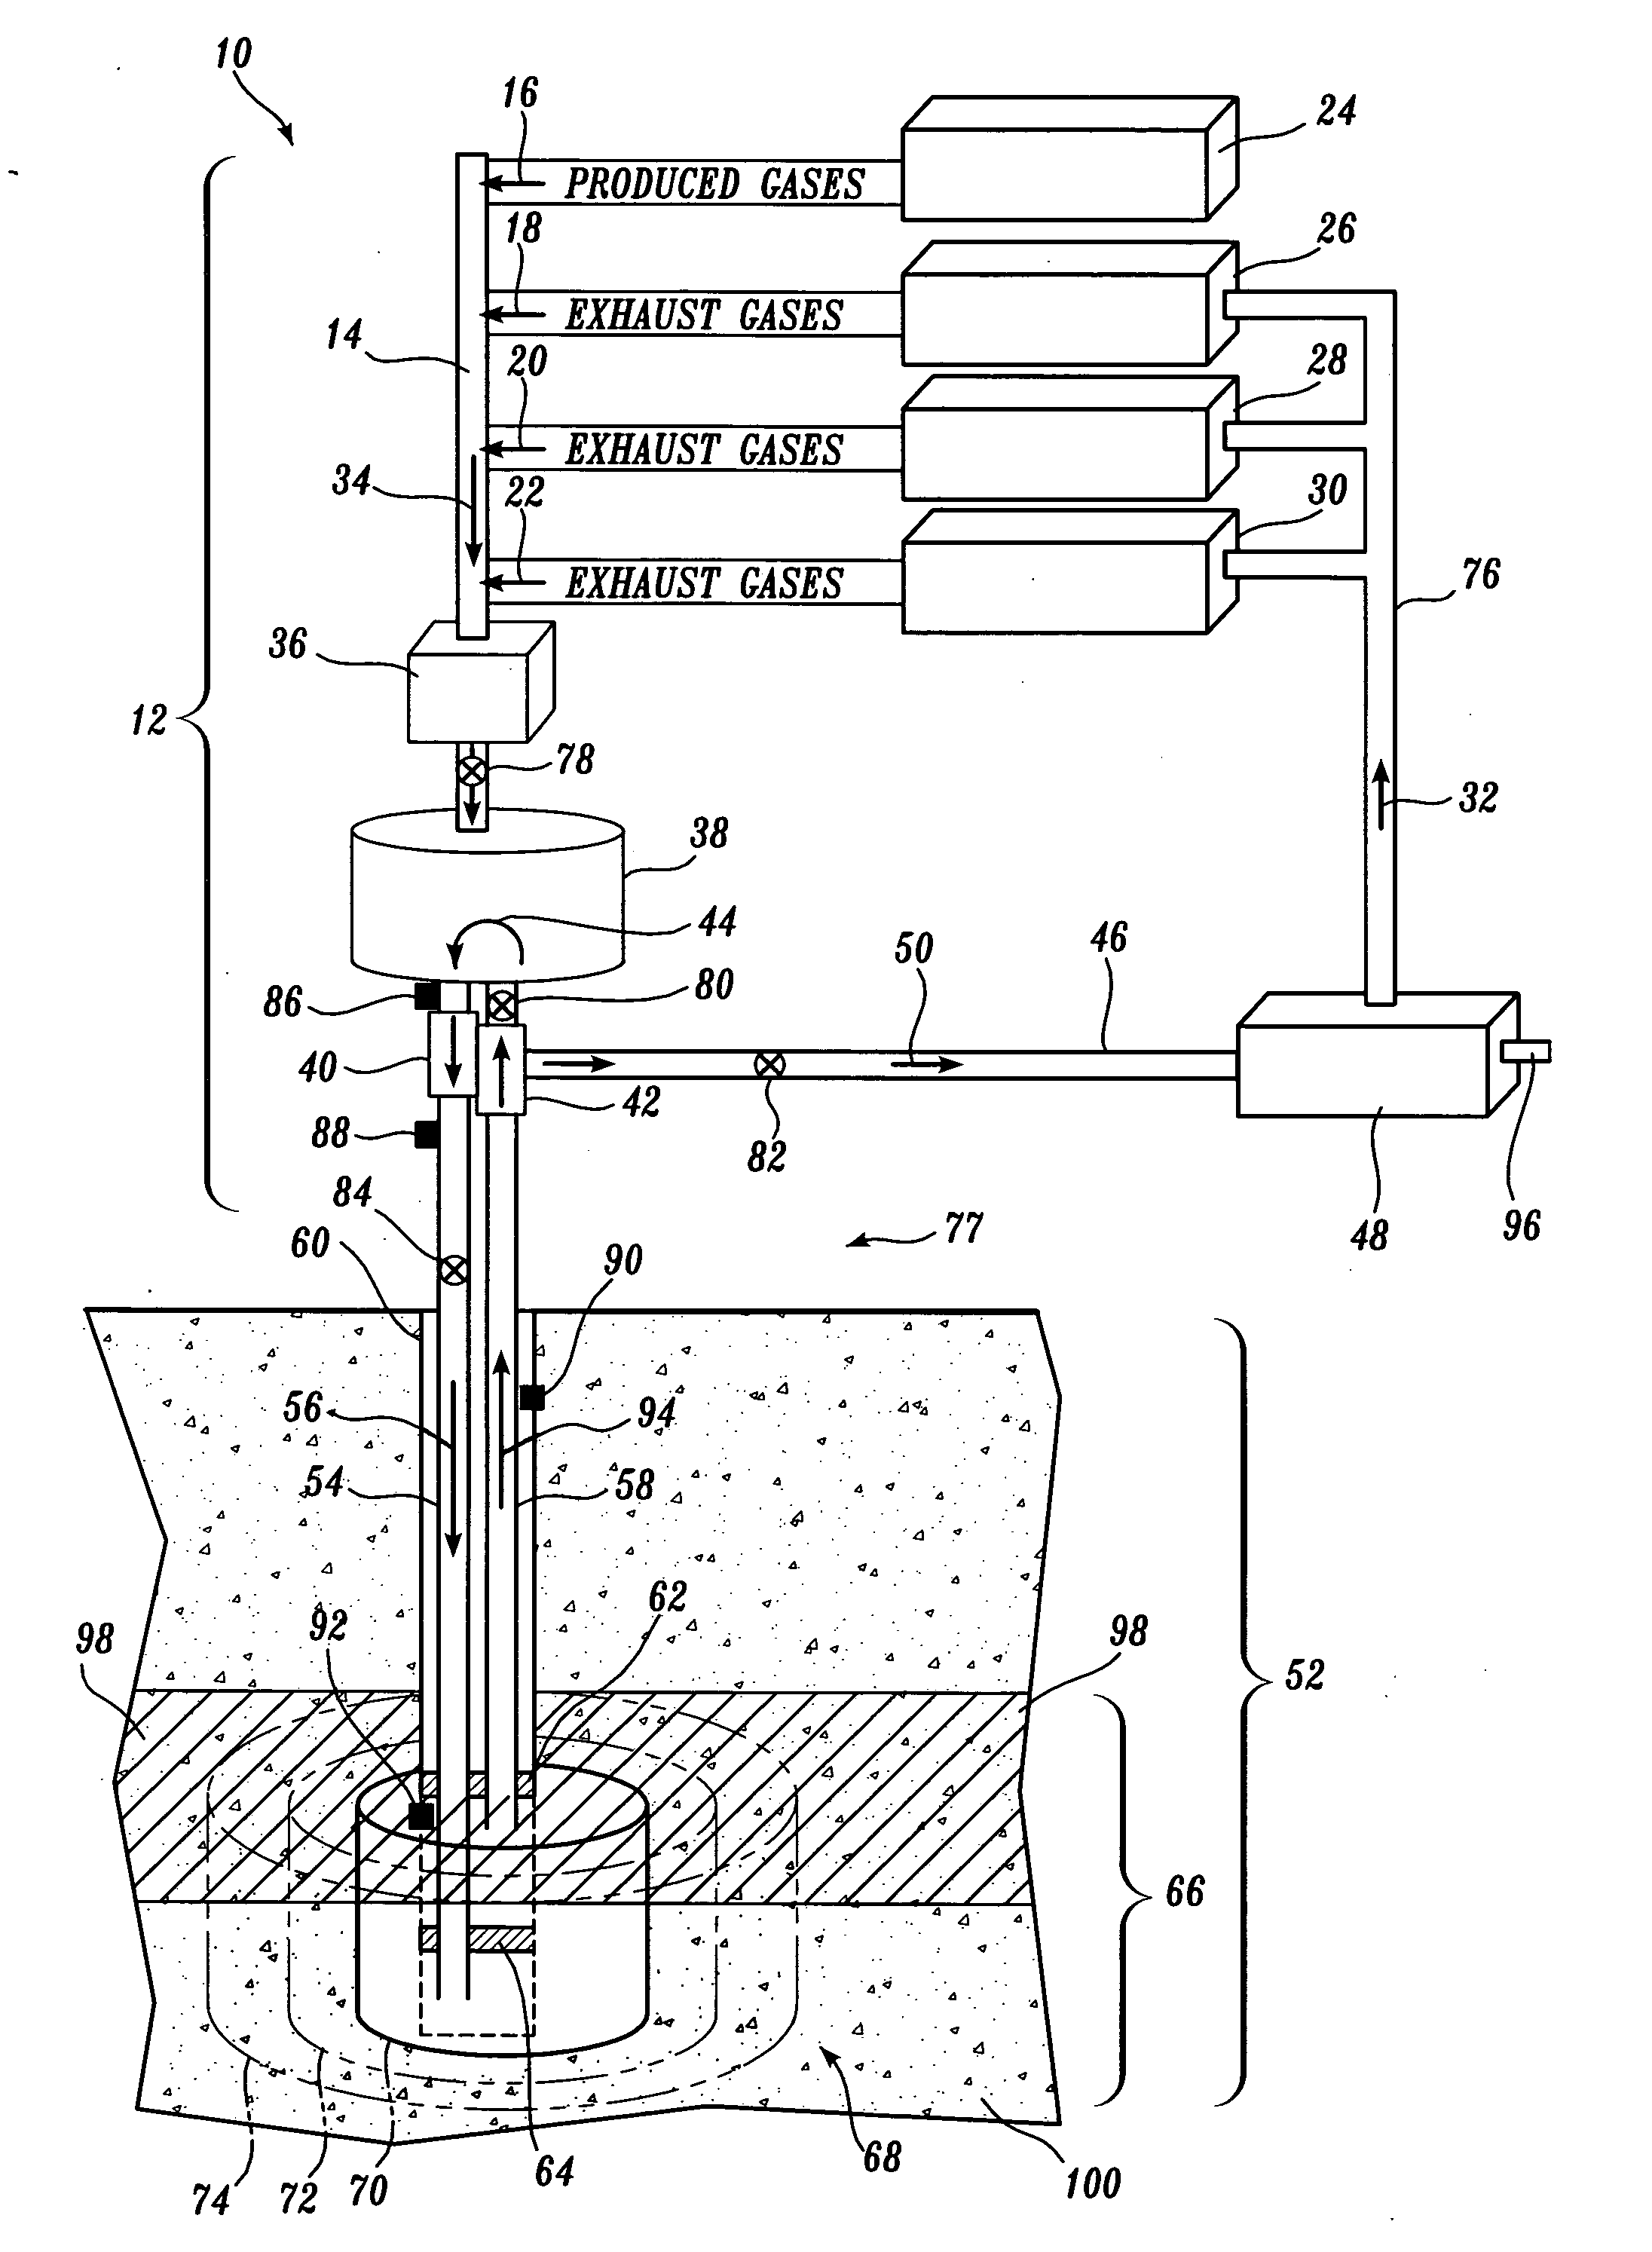 Method of sequestering carbon dioxide while producing natural gas